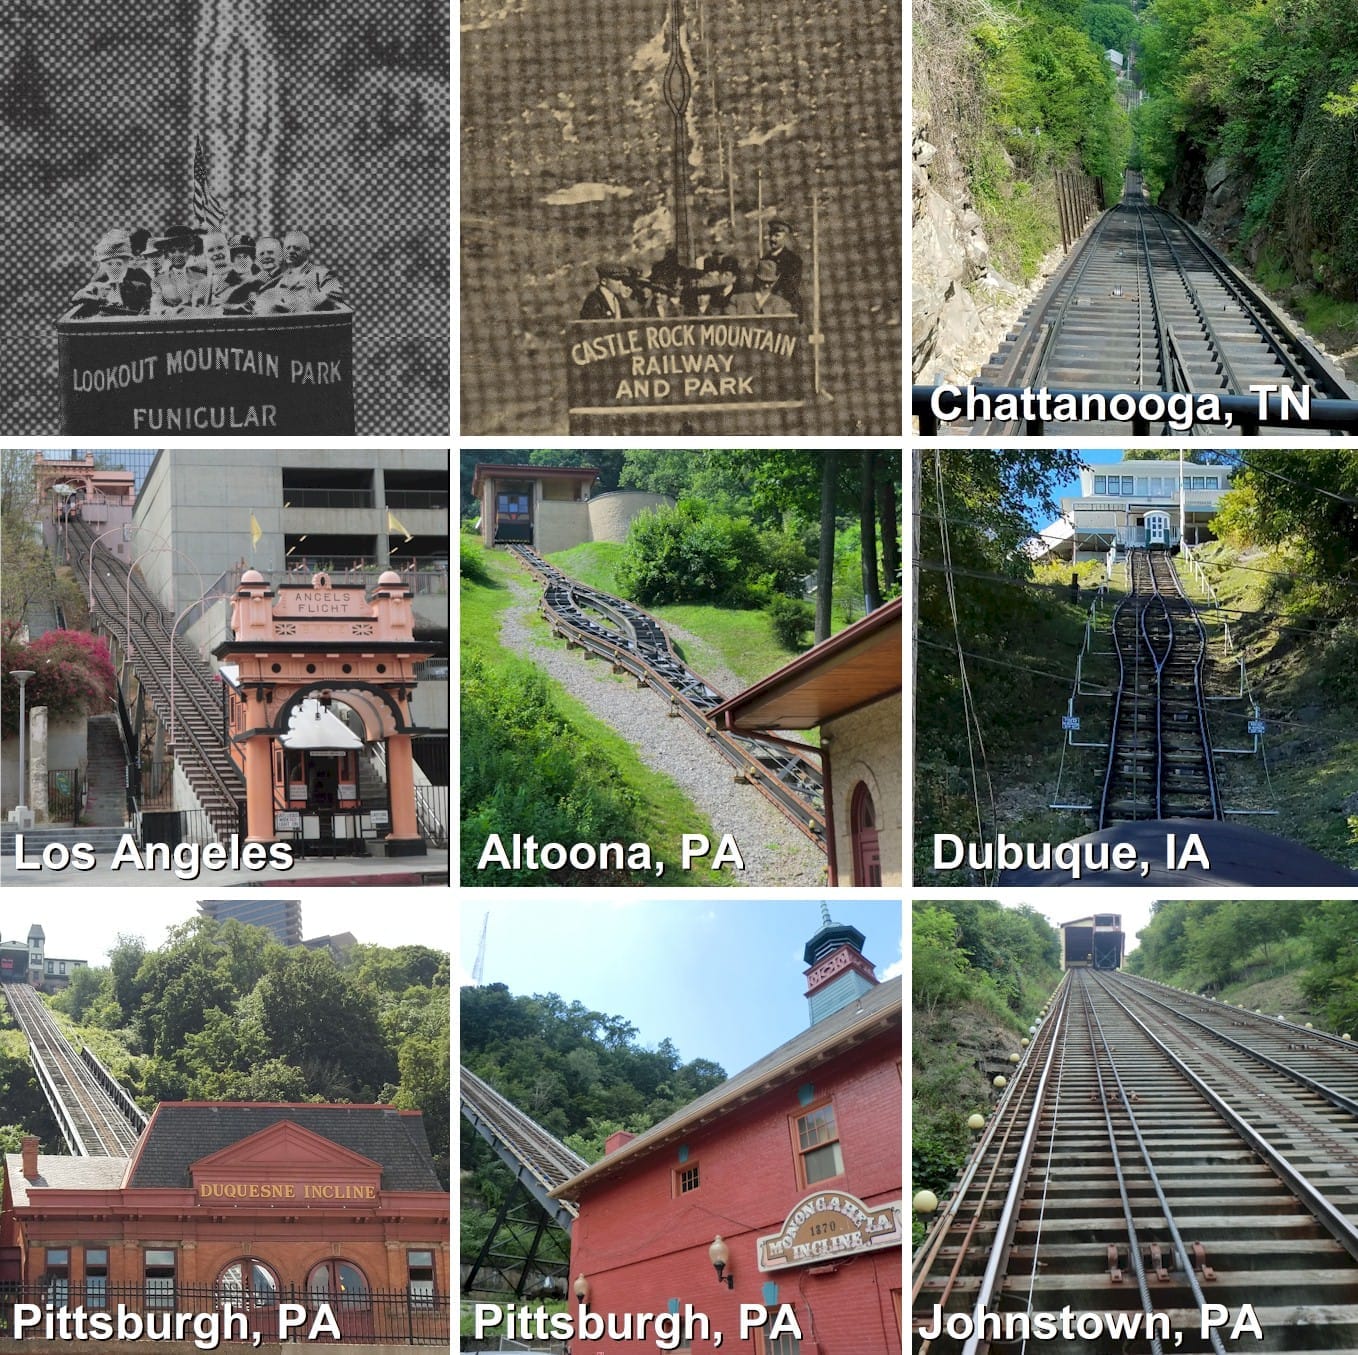 single and double track configurations at funiculars in Iowa, Tennessee, Pennsylvania, and California